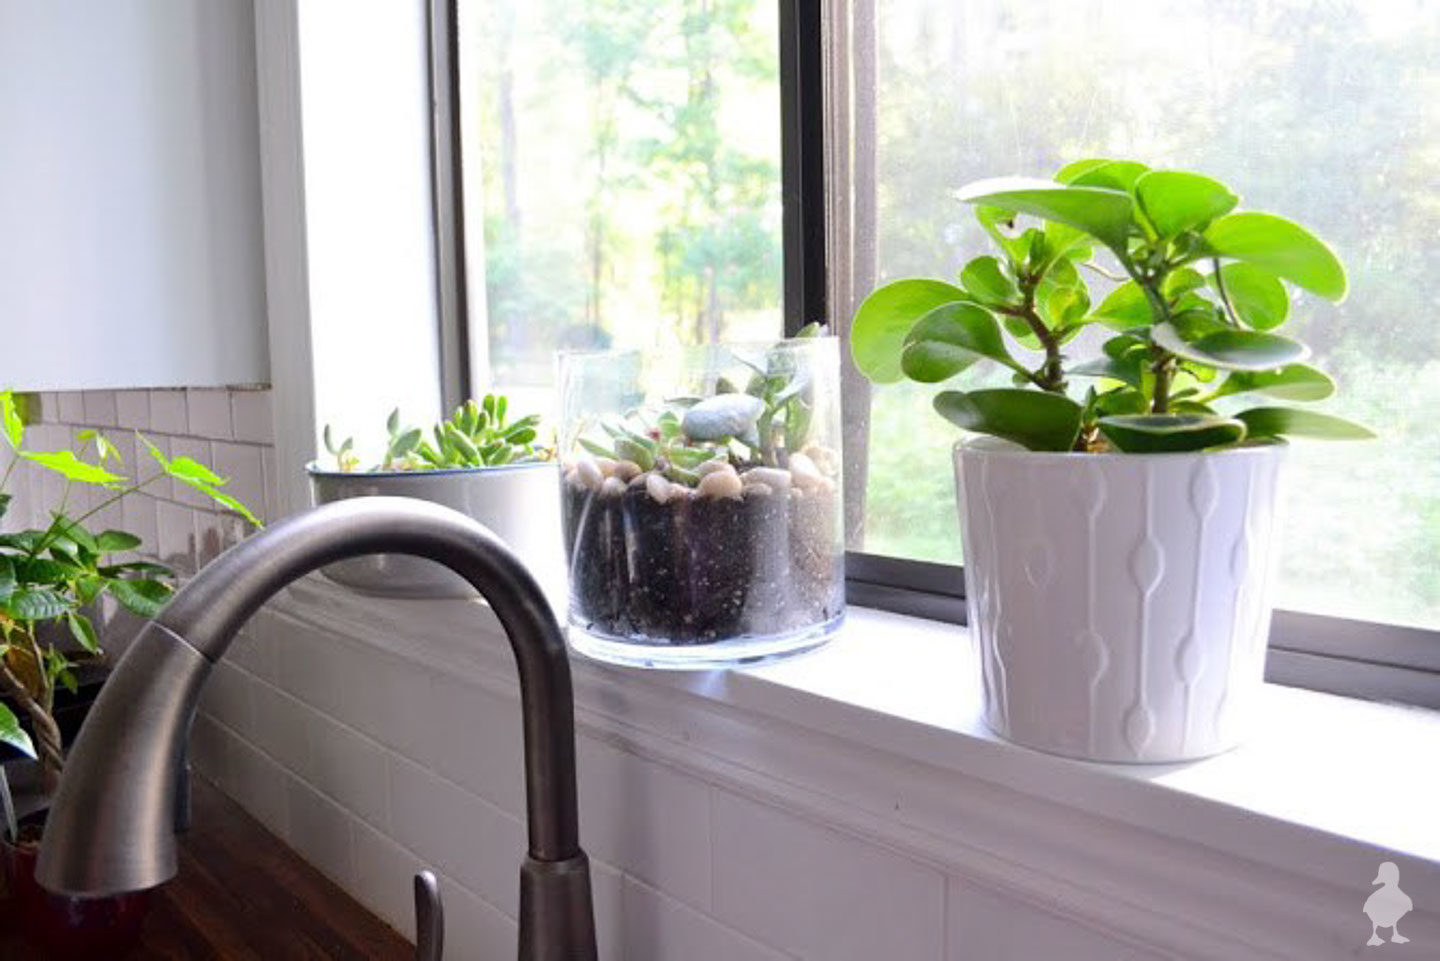 plants and succulents along kitchen sink